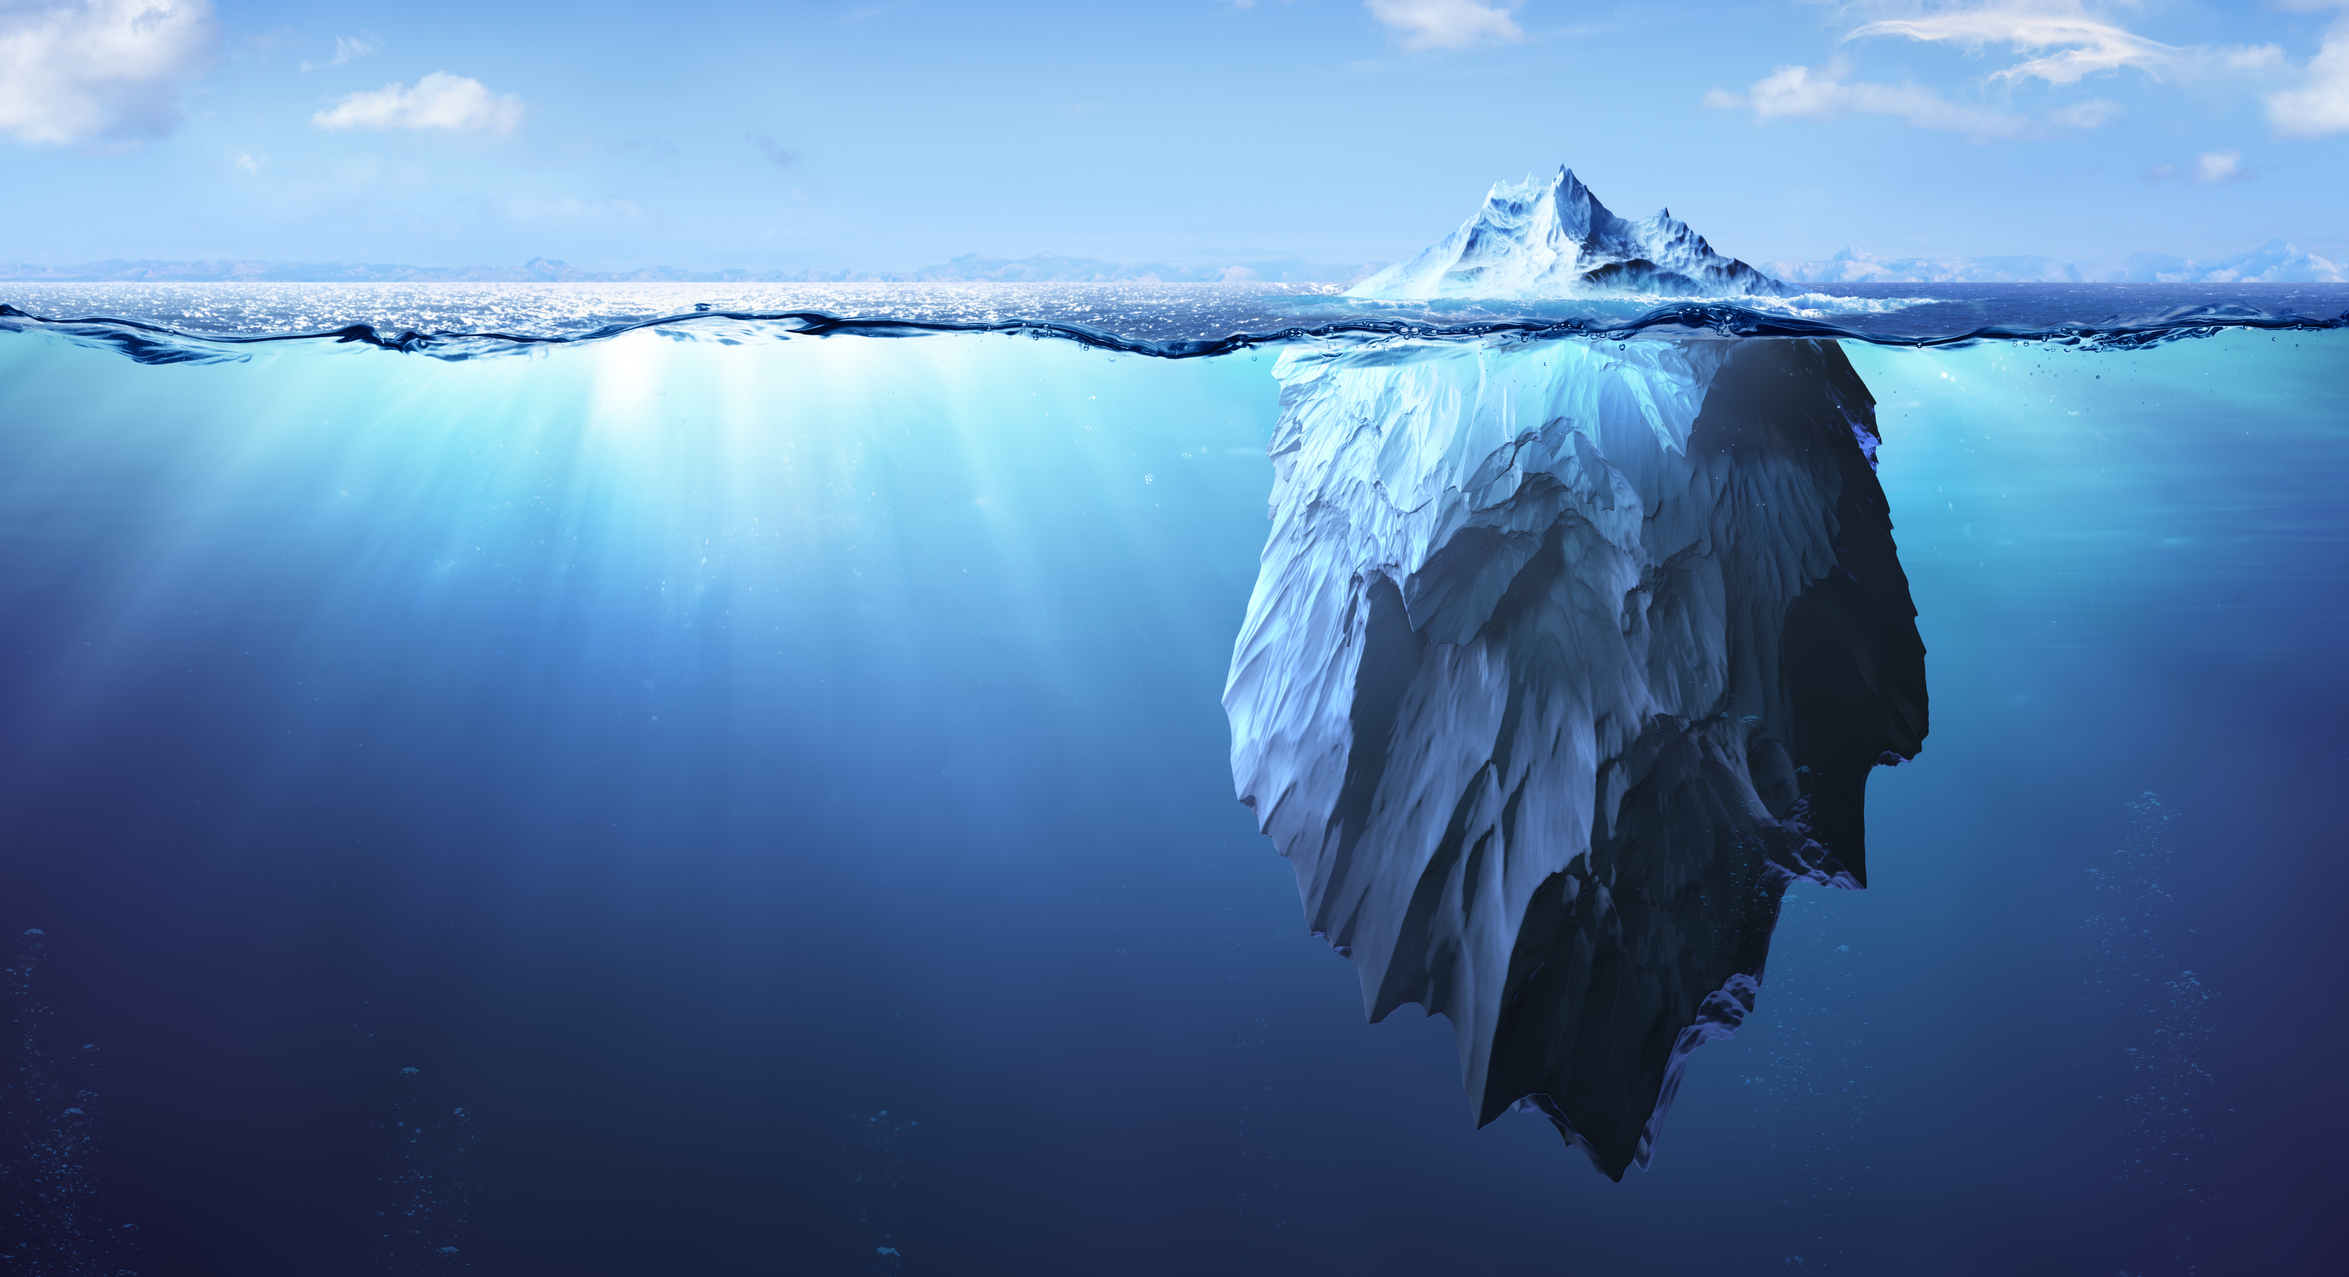 Graphic image of an iceberg tip above water with a significant amount of ice below the surface